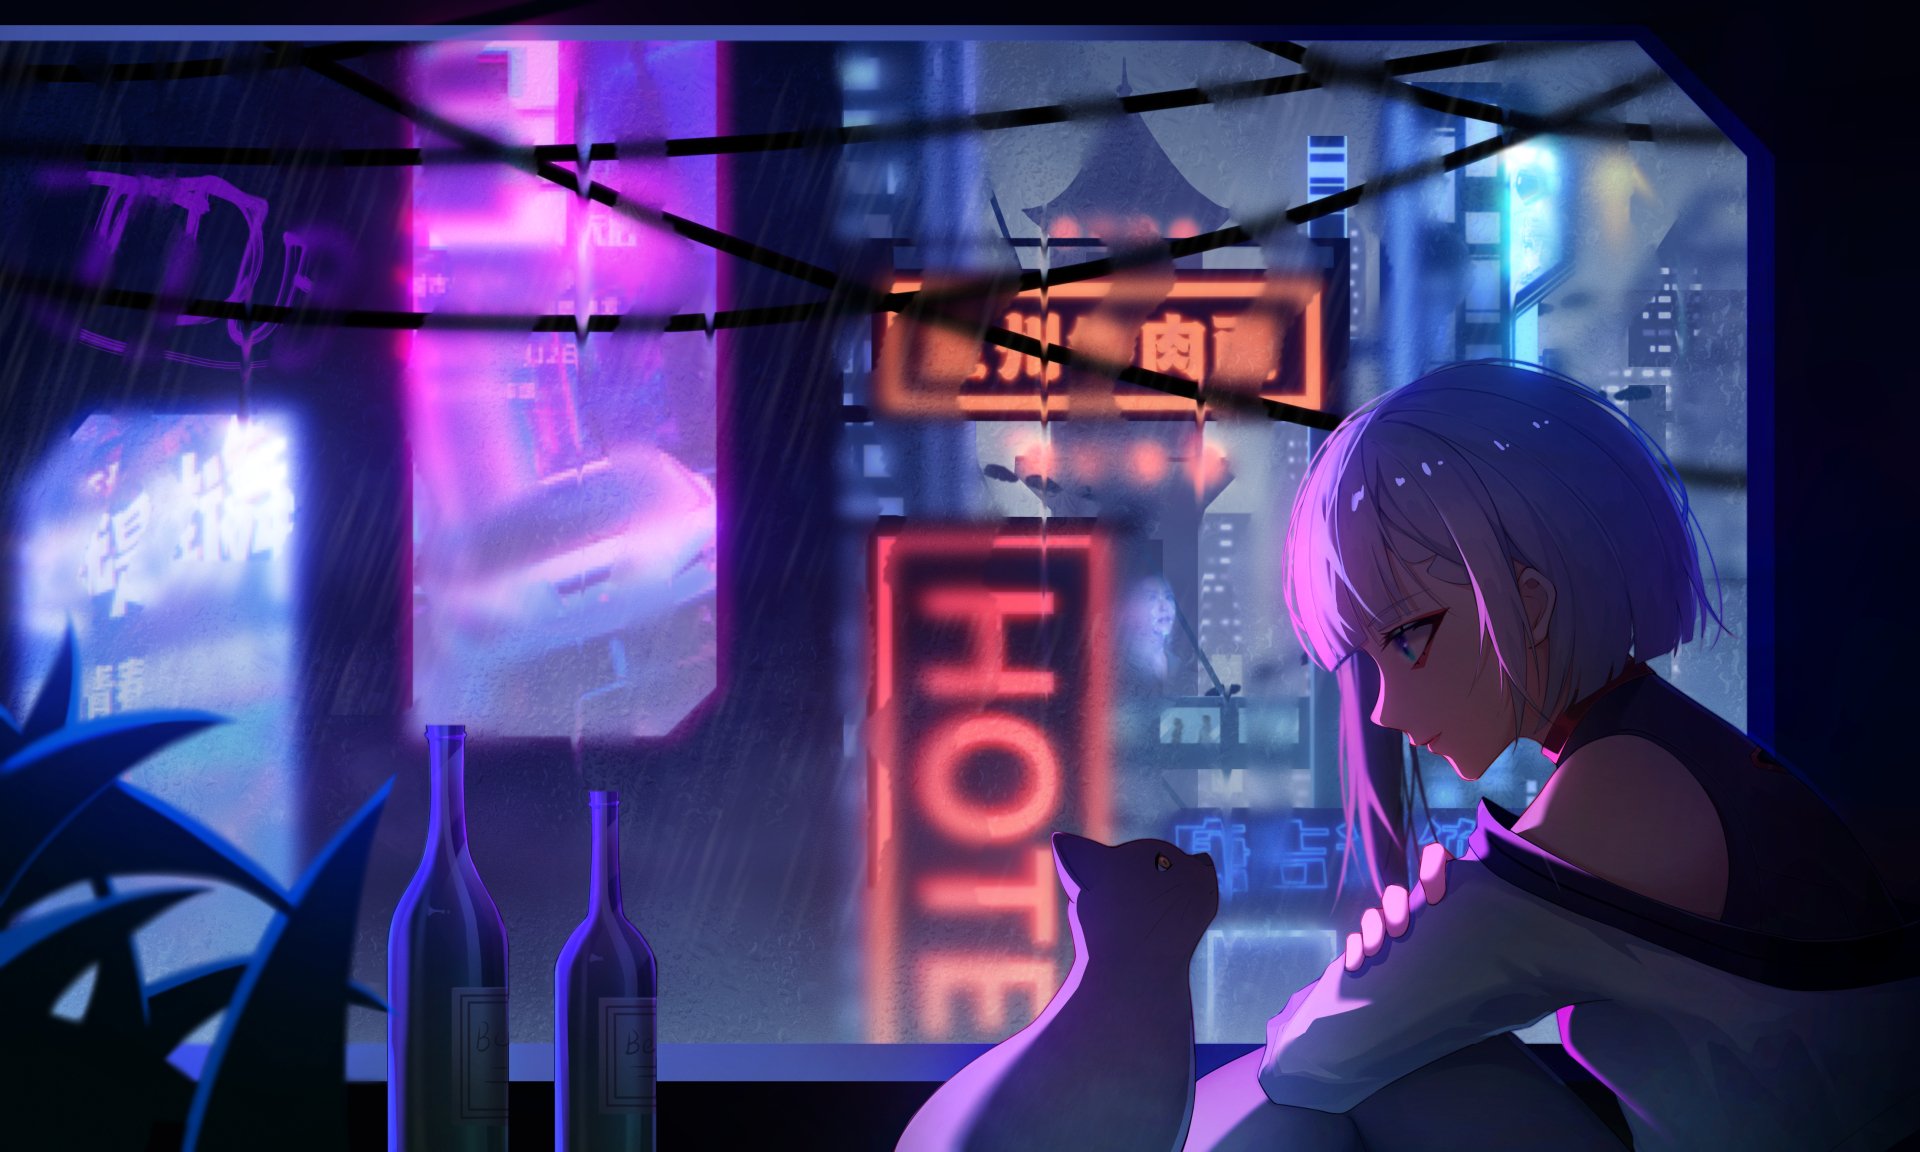 Page 5 | Cyberpunk Anime Girl Images - Free Download on Freepik